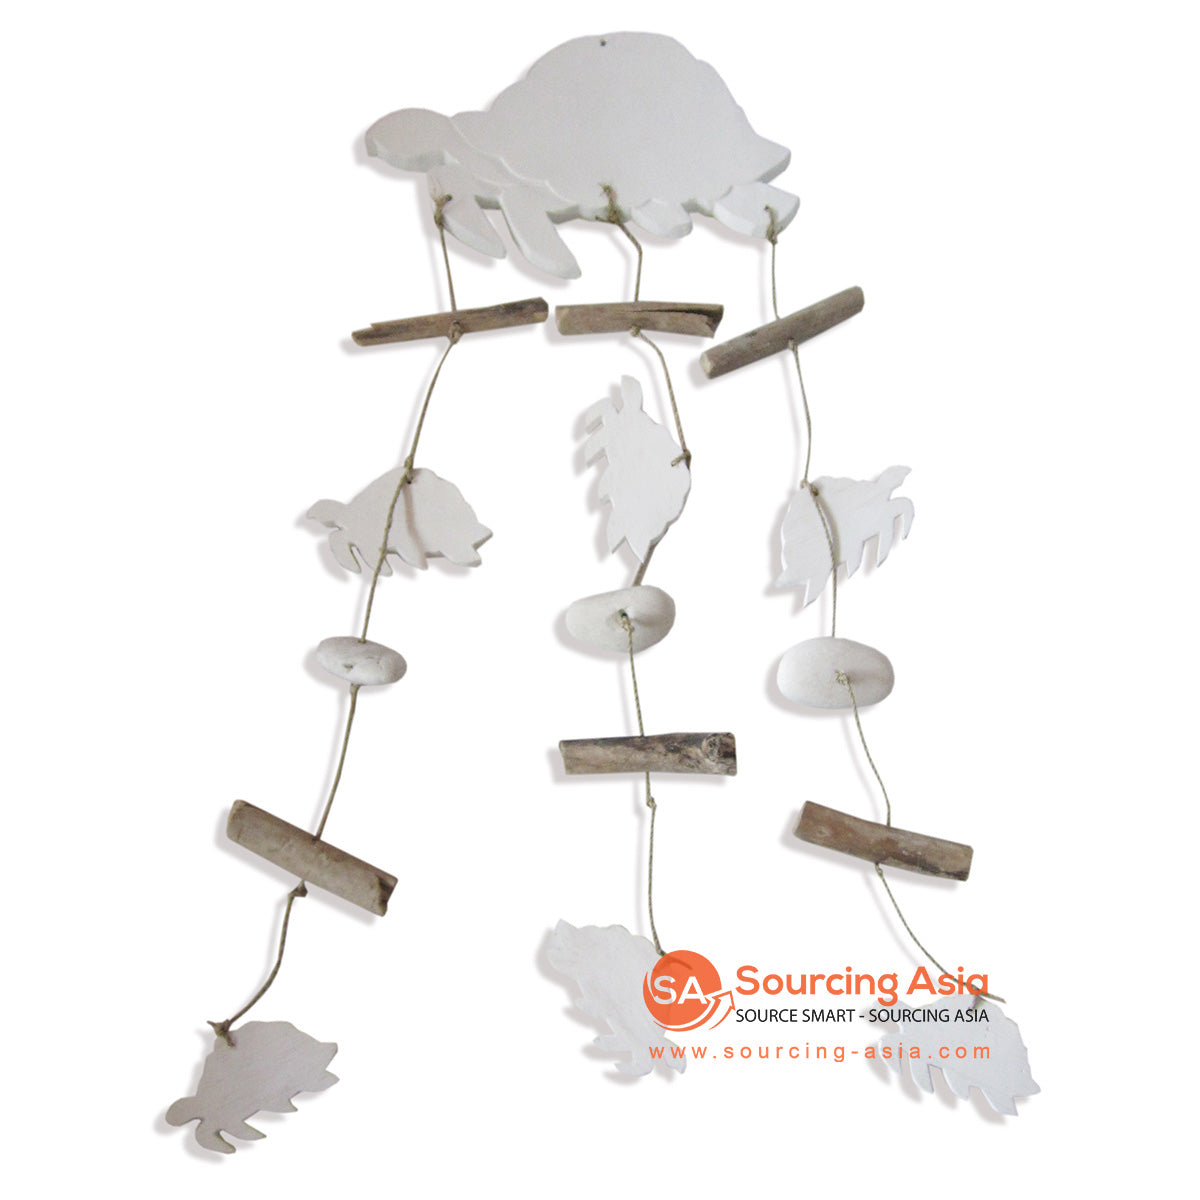 HAN009 WHITE DRIFTWOOD "SEA CREATURES" HANGING DECORATION